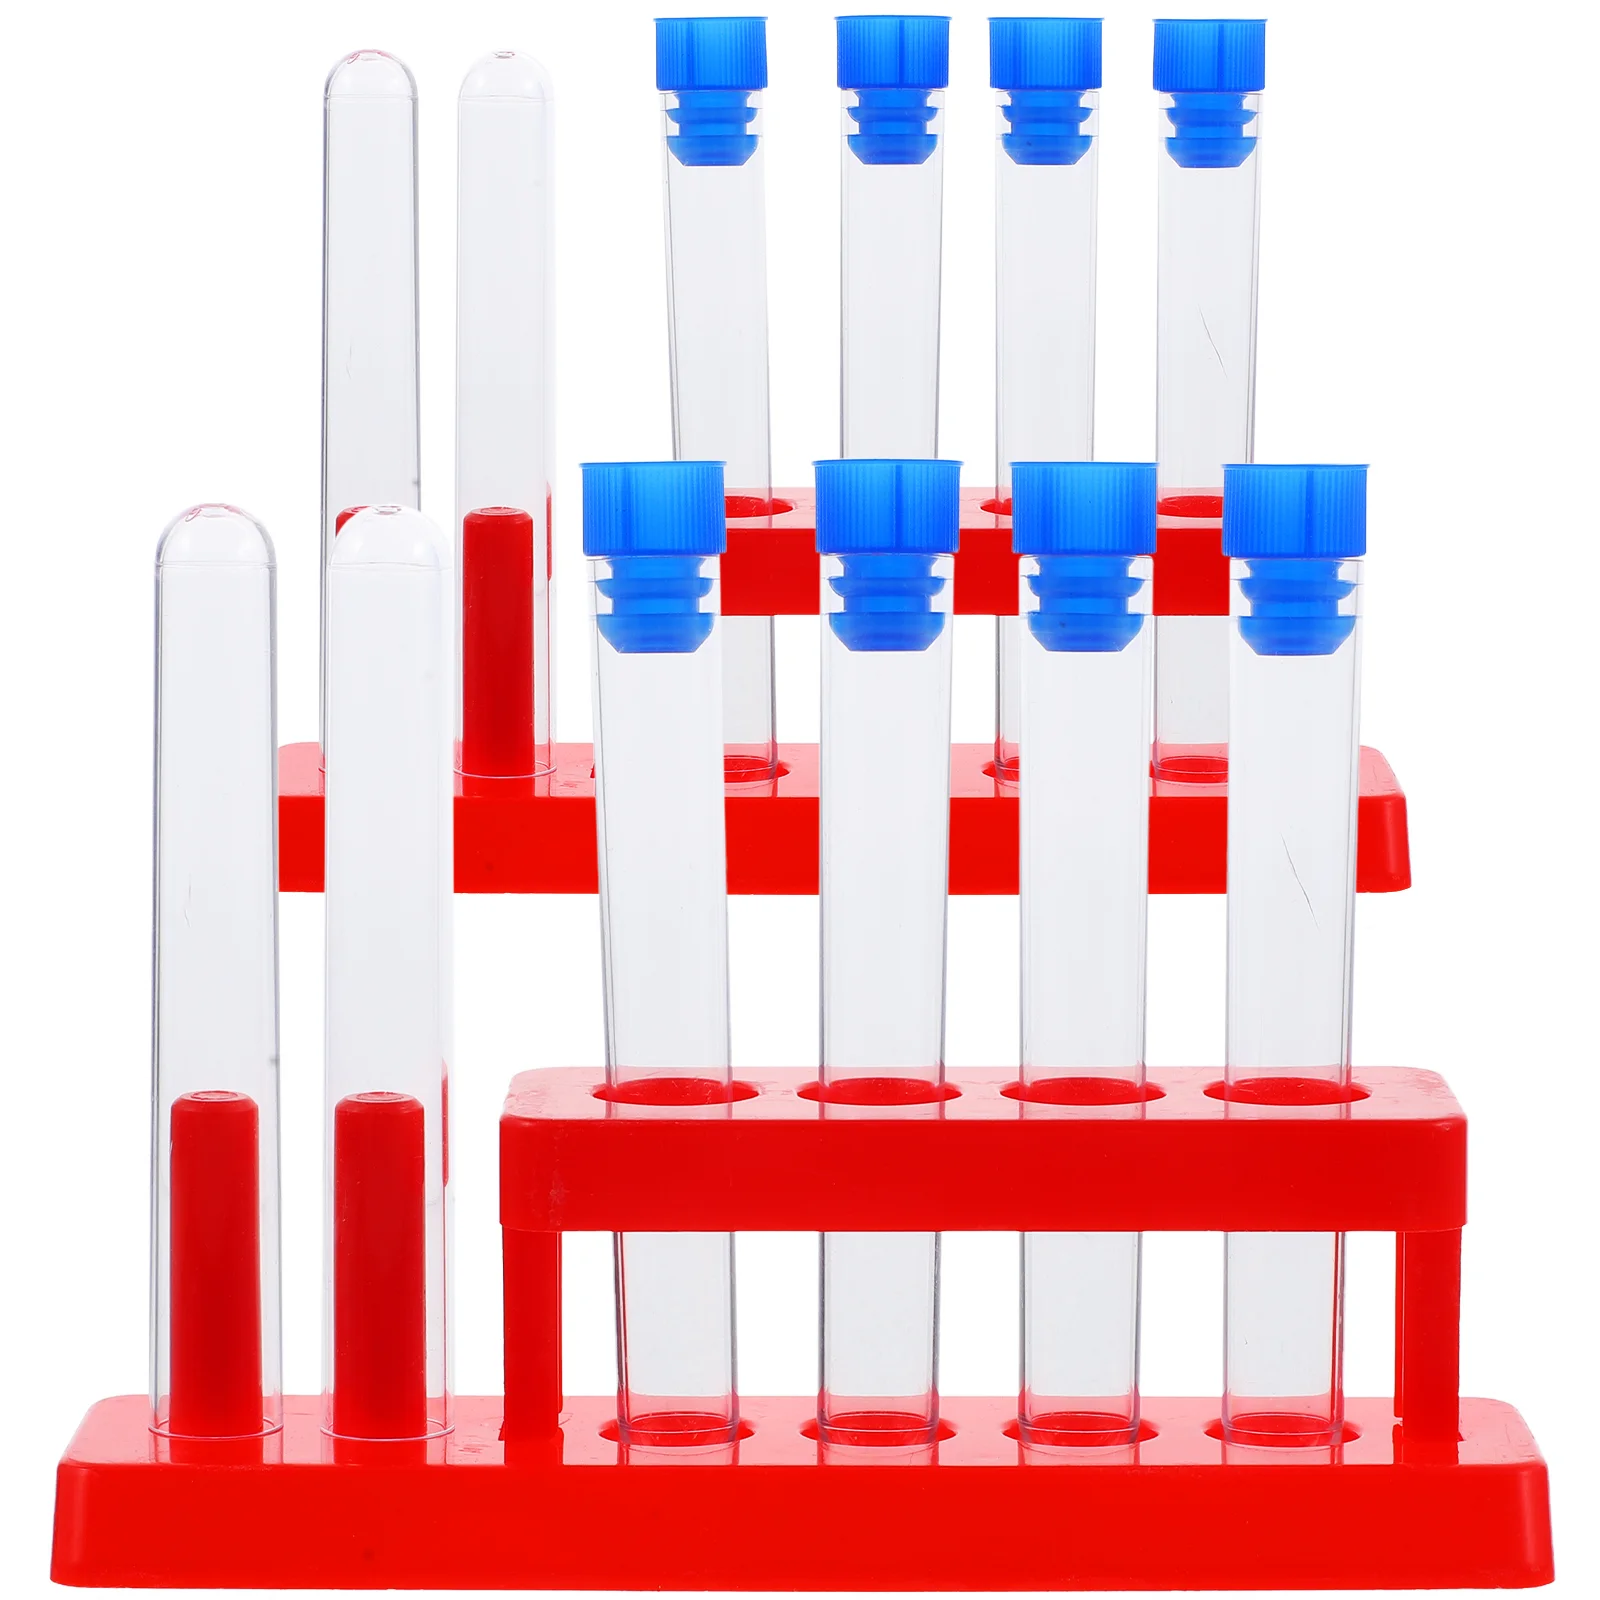 

Laboratory Testing Tubes Vials Liquid Tubes With Storage Rack Manual Science Chemical Experiment Teaching Equipment